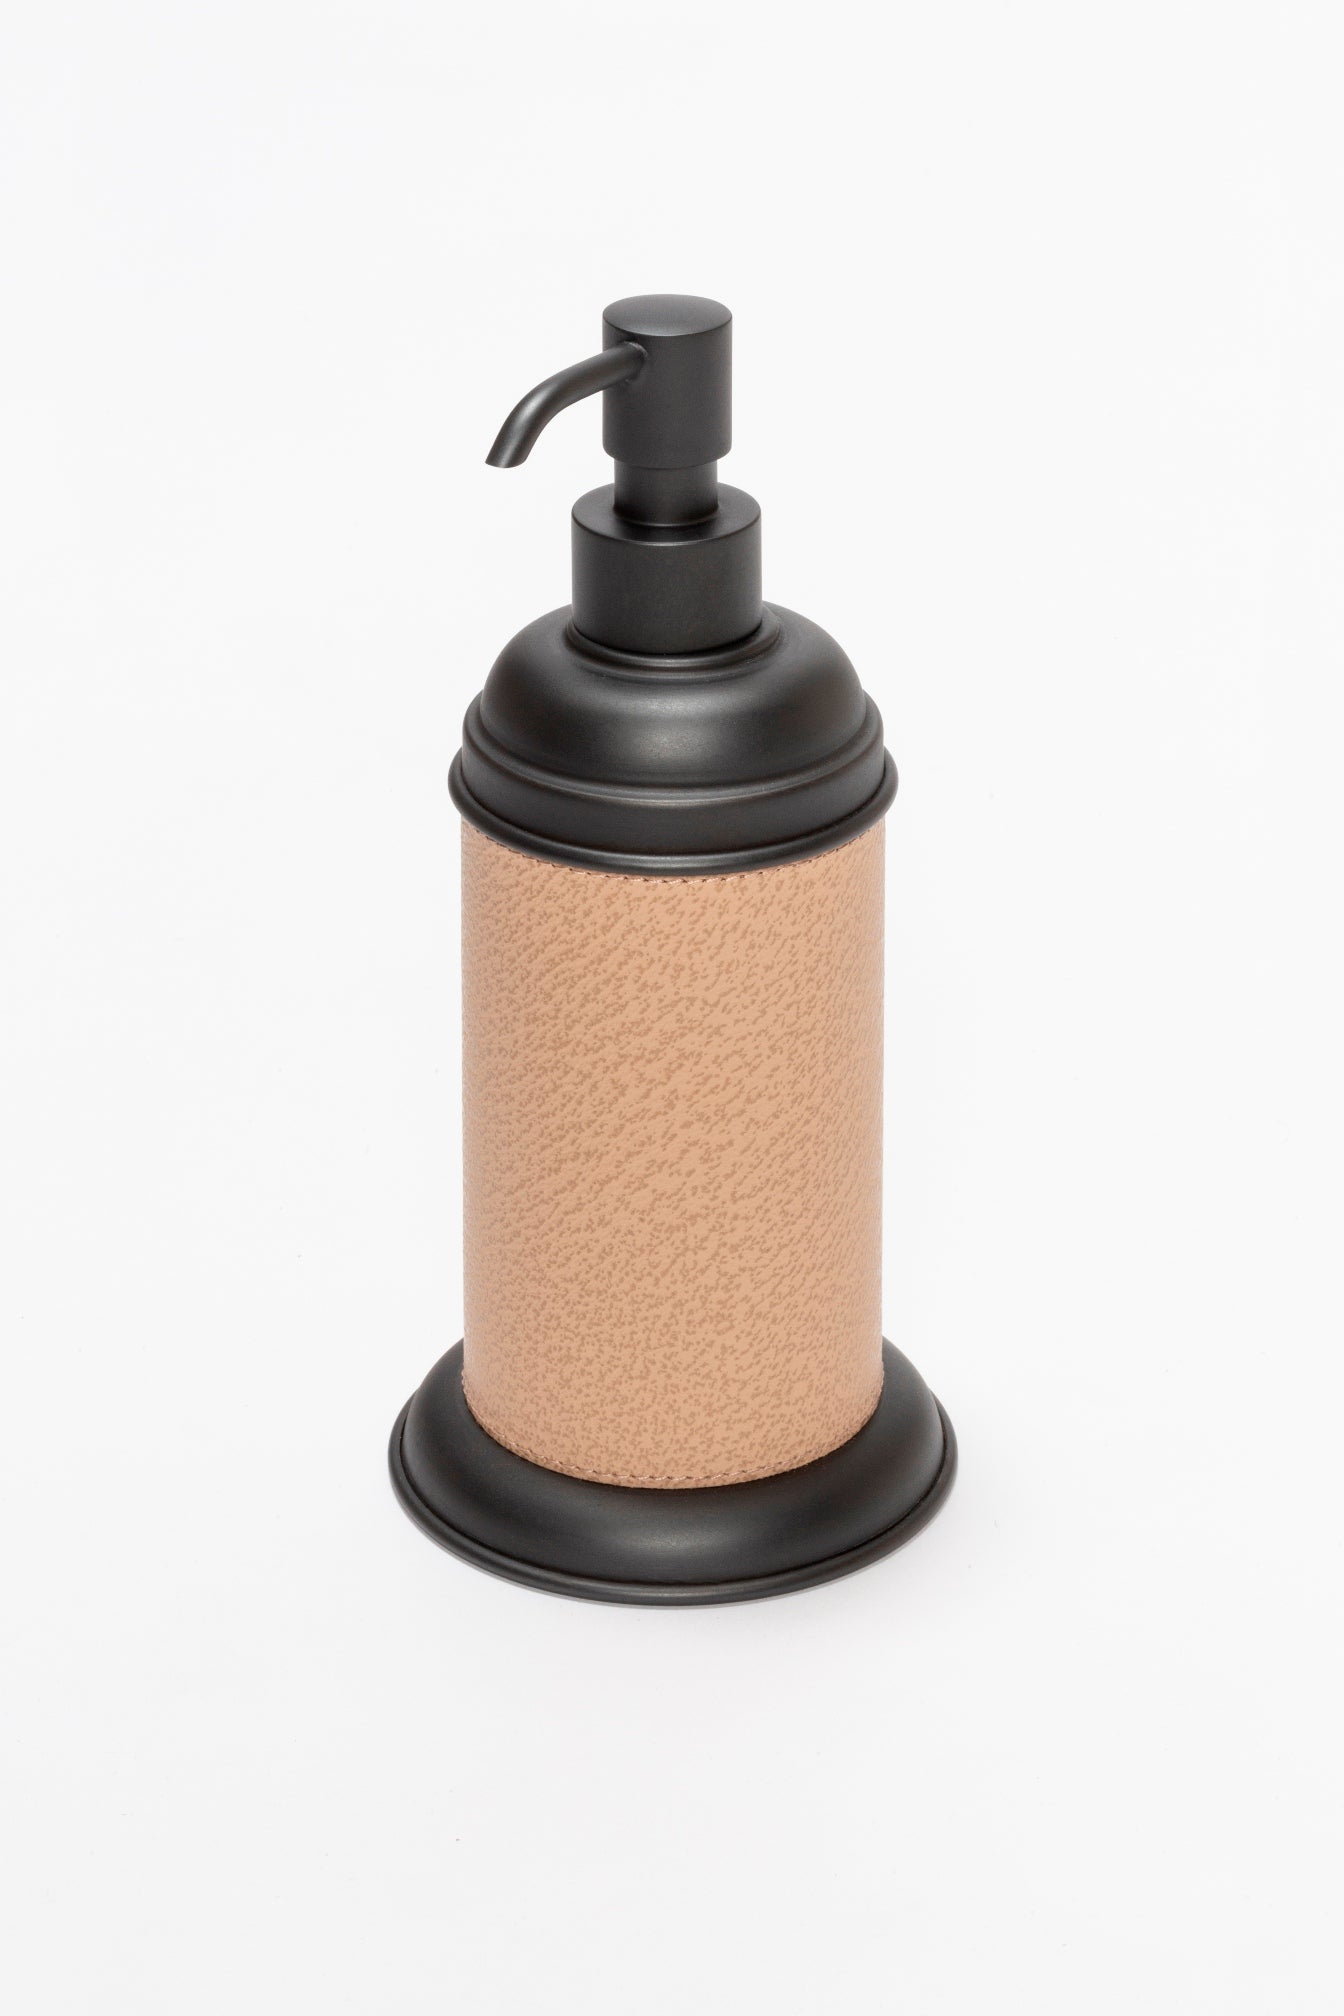 Giobagnara Dubai Leather-Covered Metal Soap Dispenser | Part of Dubai Bathroom Collection | Luxurious Bath Accessories | Crafted with Fine Leather-Covered Metal Structure | Different Finishes Available | Oriental-Inspired Design | Explore the Dubai Bathroom Collection at 2Jour Concierge, #1 luxury high-end gift & lifestyle shop